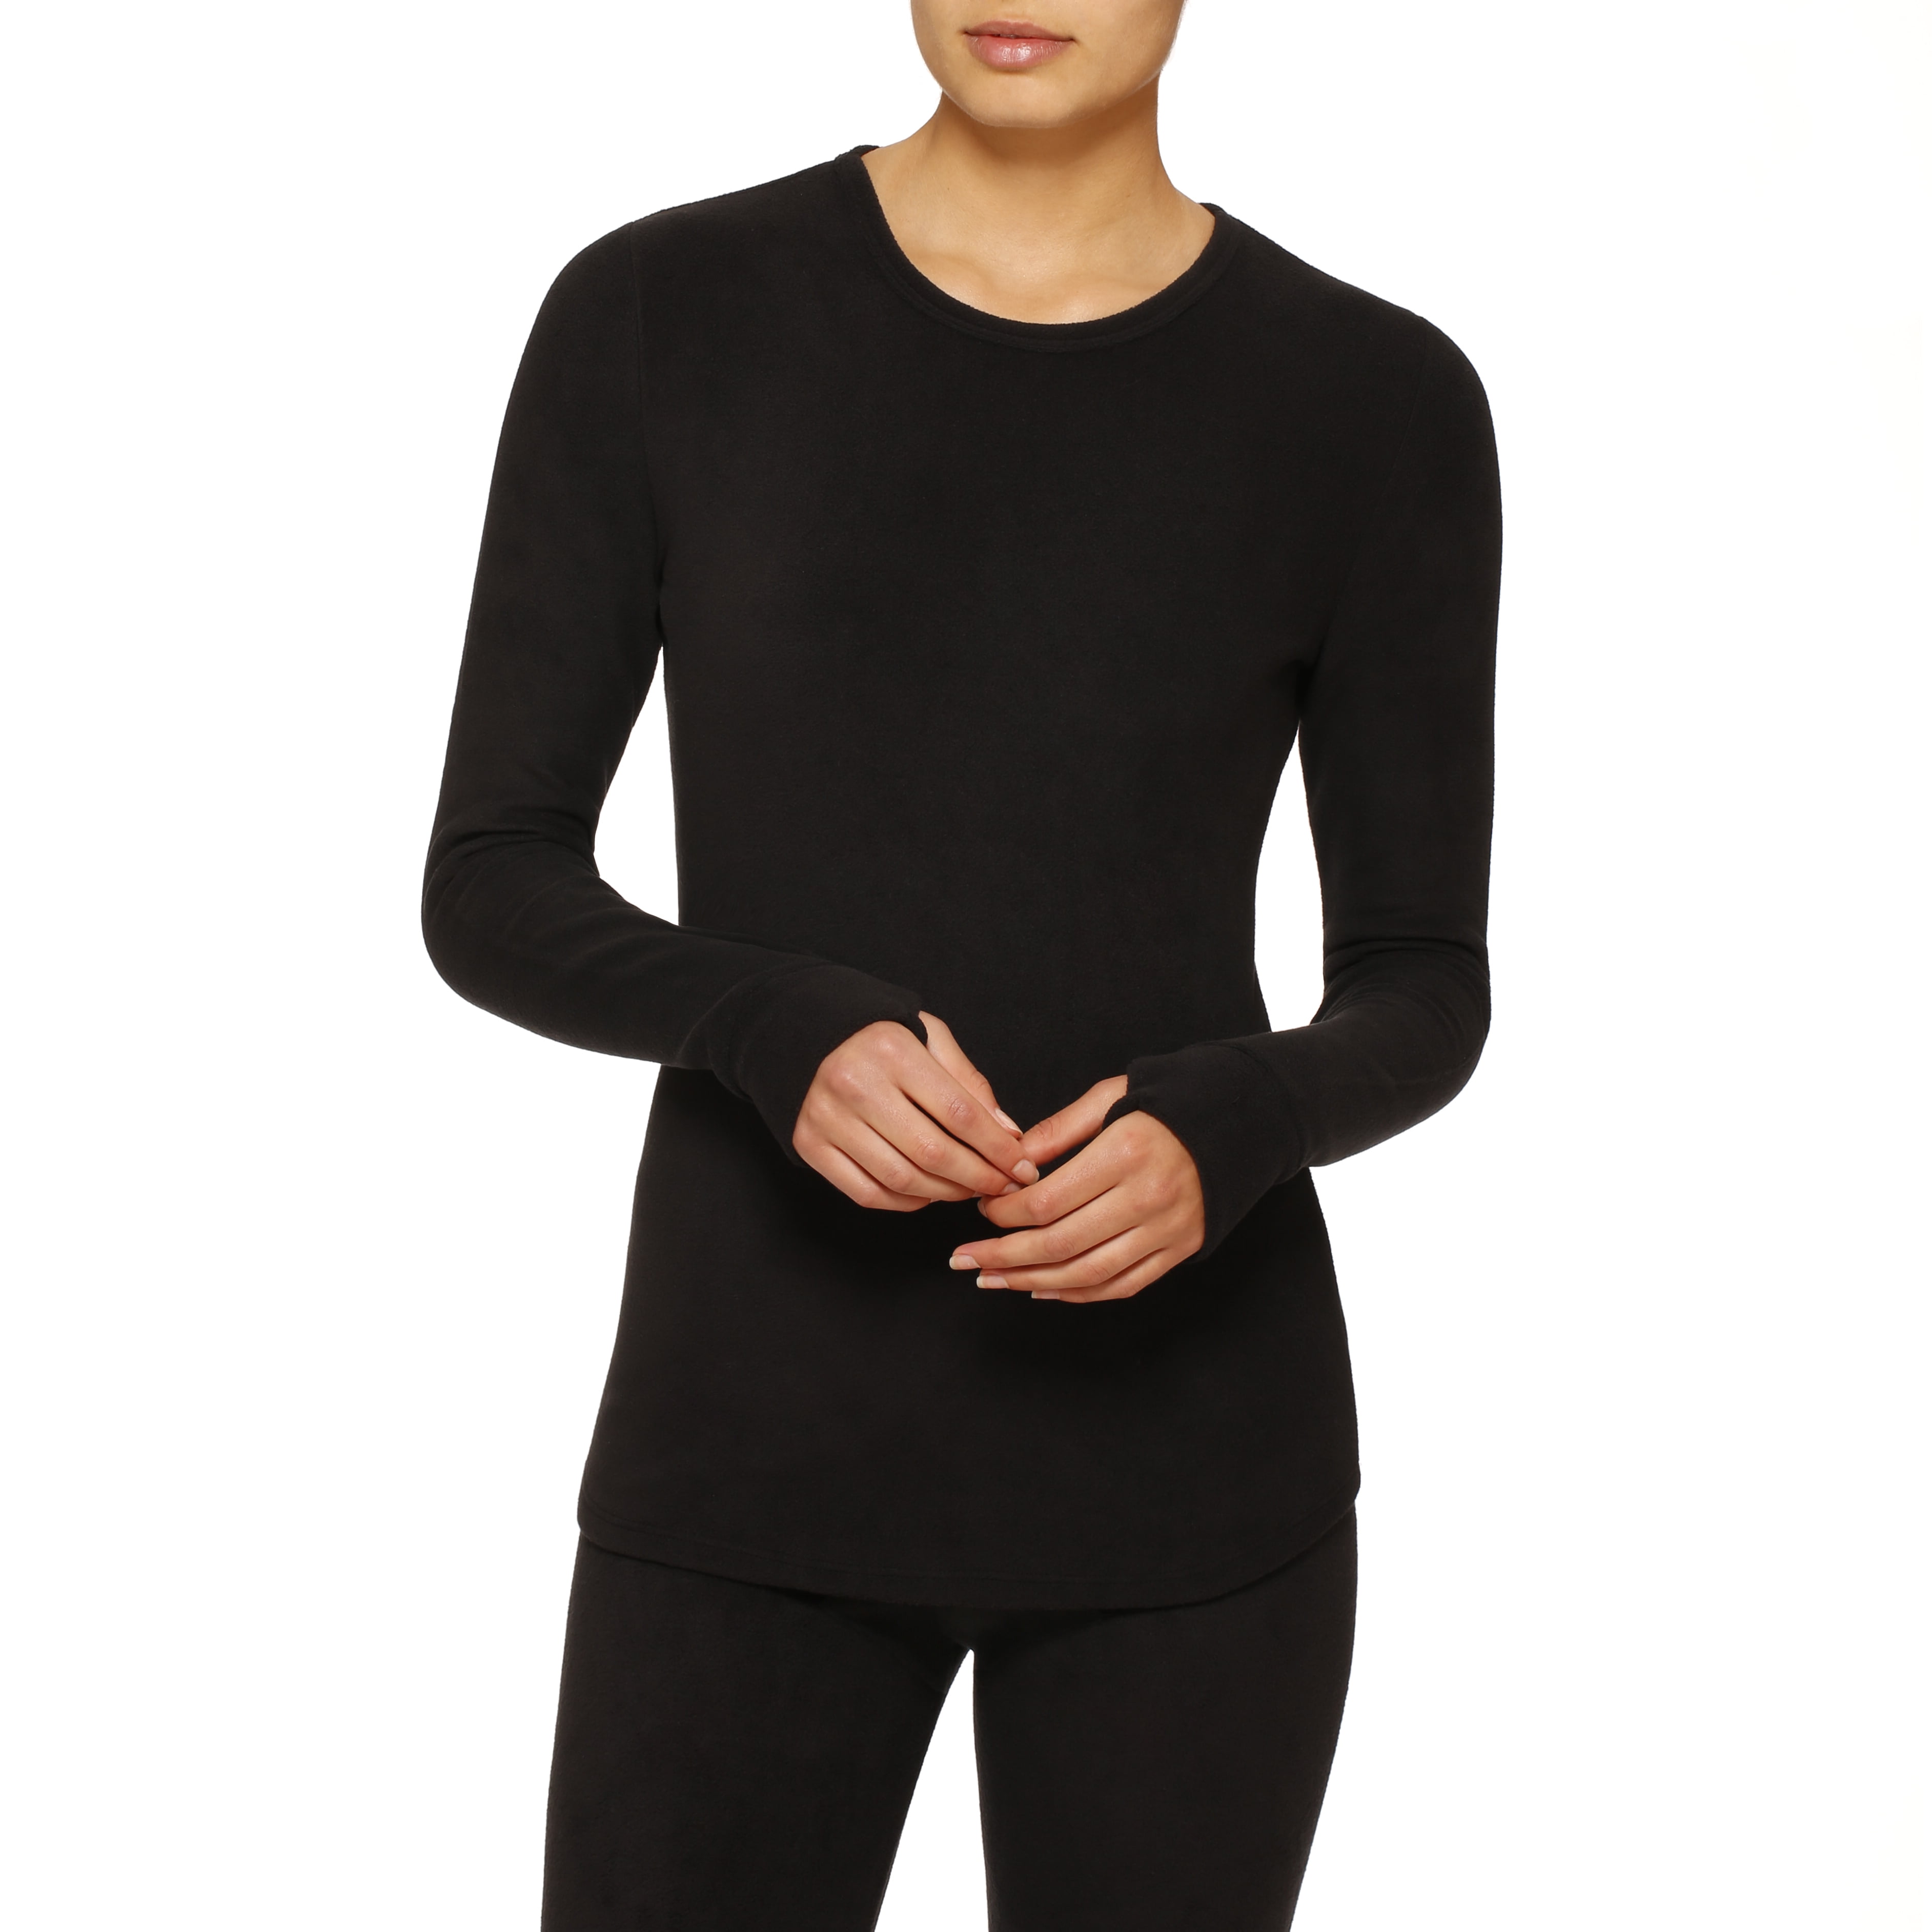 ClimateRight Long Sleeve Crew by Cuddl Duds Women's Stretch Fleece Black Large 